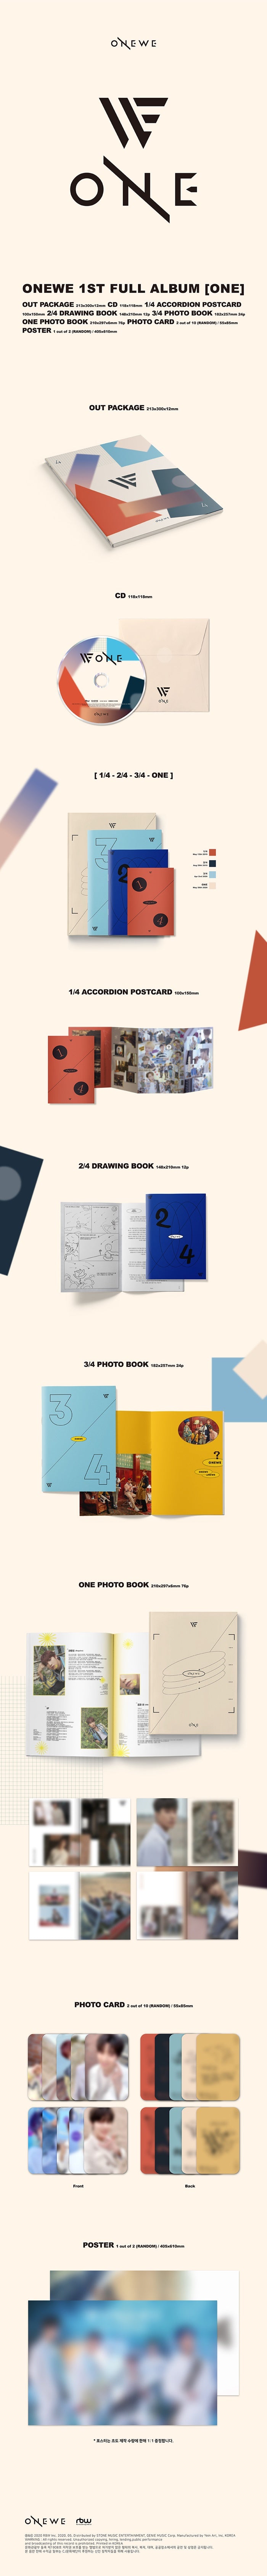 1 CD
1 Photo Book (24 pages)
1 Drawing Book (12 pages)
1 One Photo Book (76 pages)
2 Photo Cards
1 Accordion Post